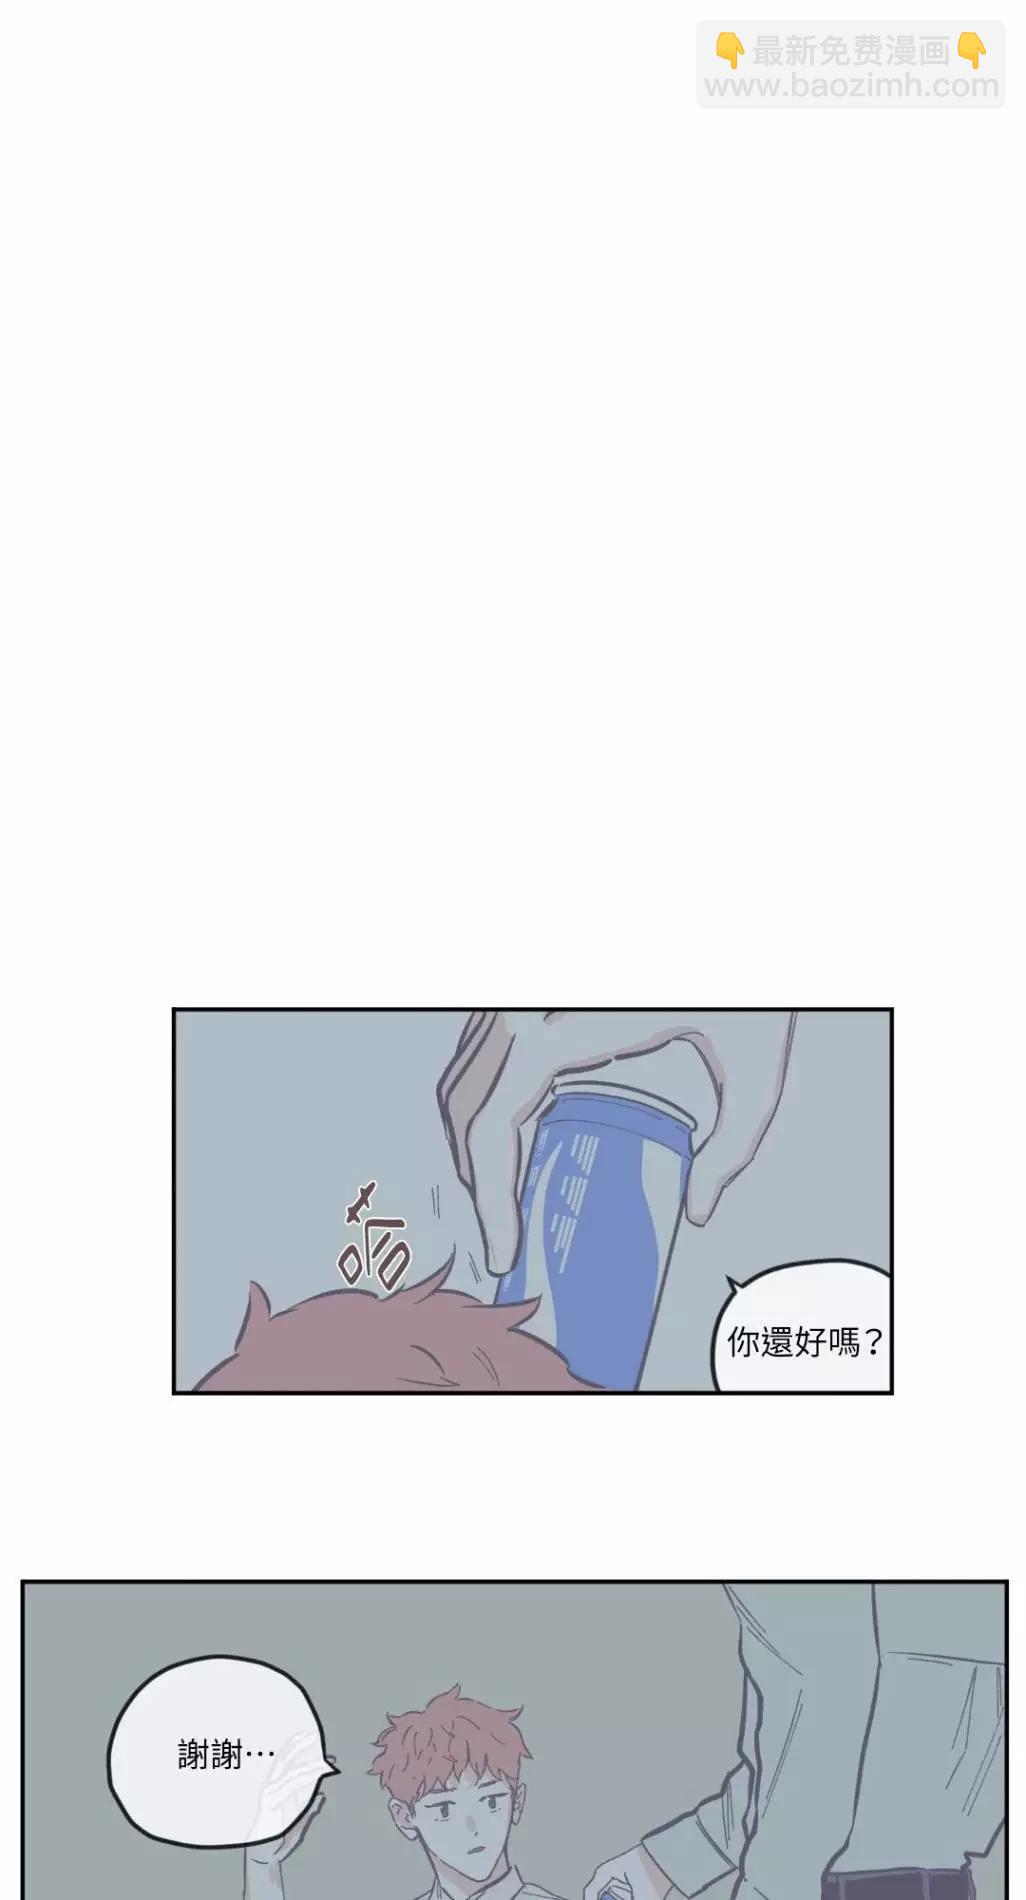 Clean Up百分百 - 第66話 - 3